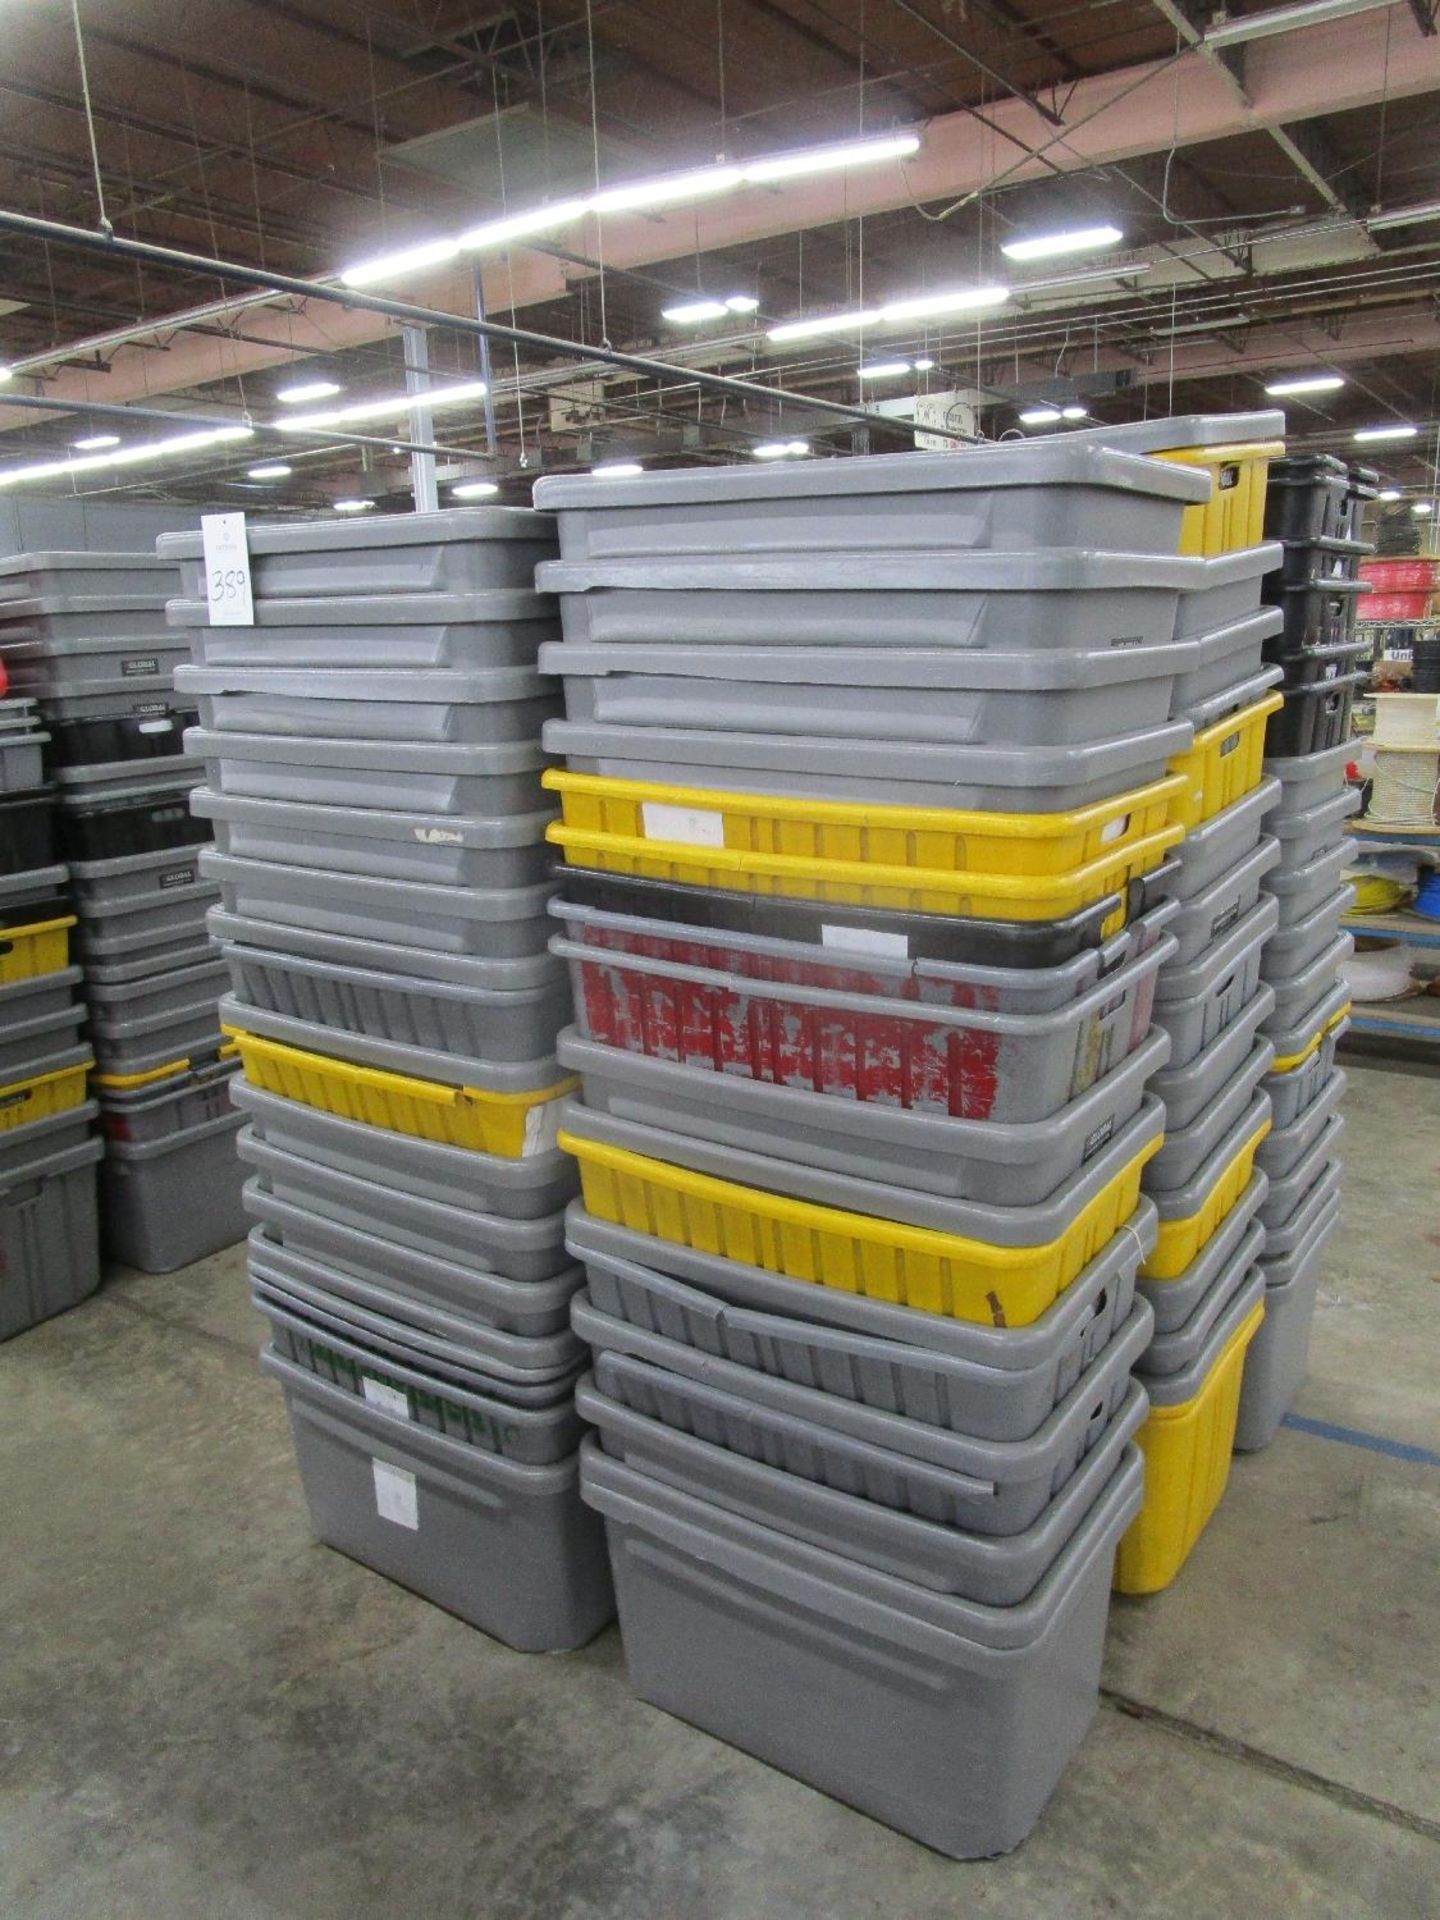 Lot of Stackable Plastic Bins - Image 2 of 2